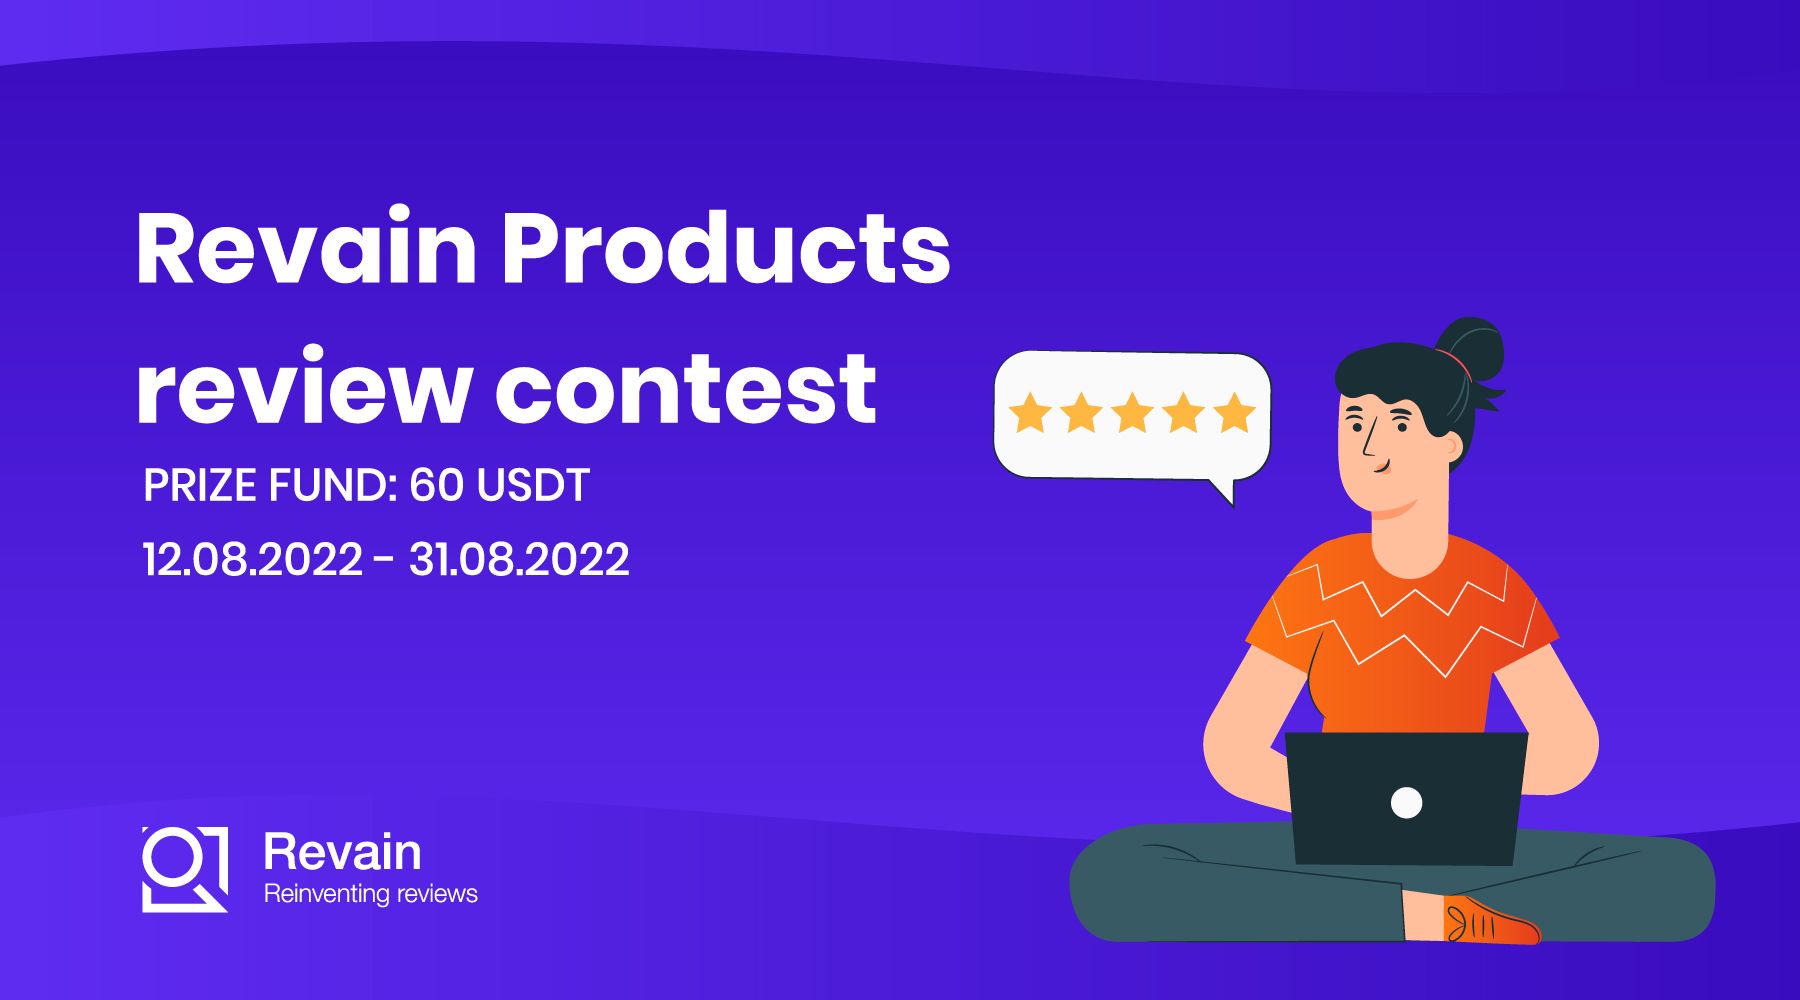 Article Revain Products review contest!